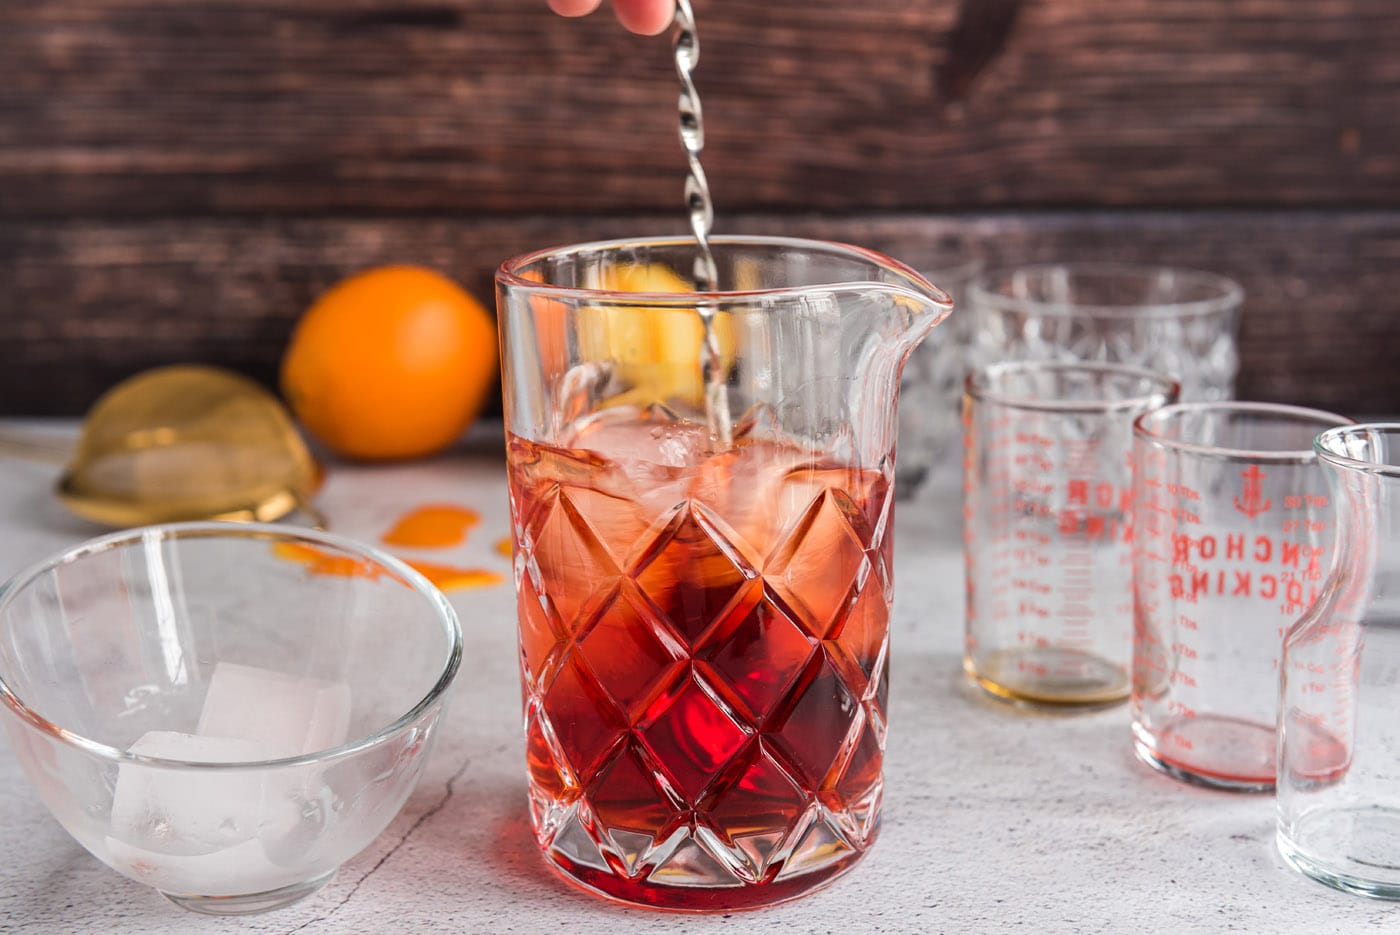 pouring ingredients for Negroni into a mixing glass